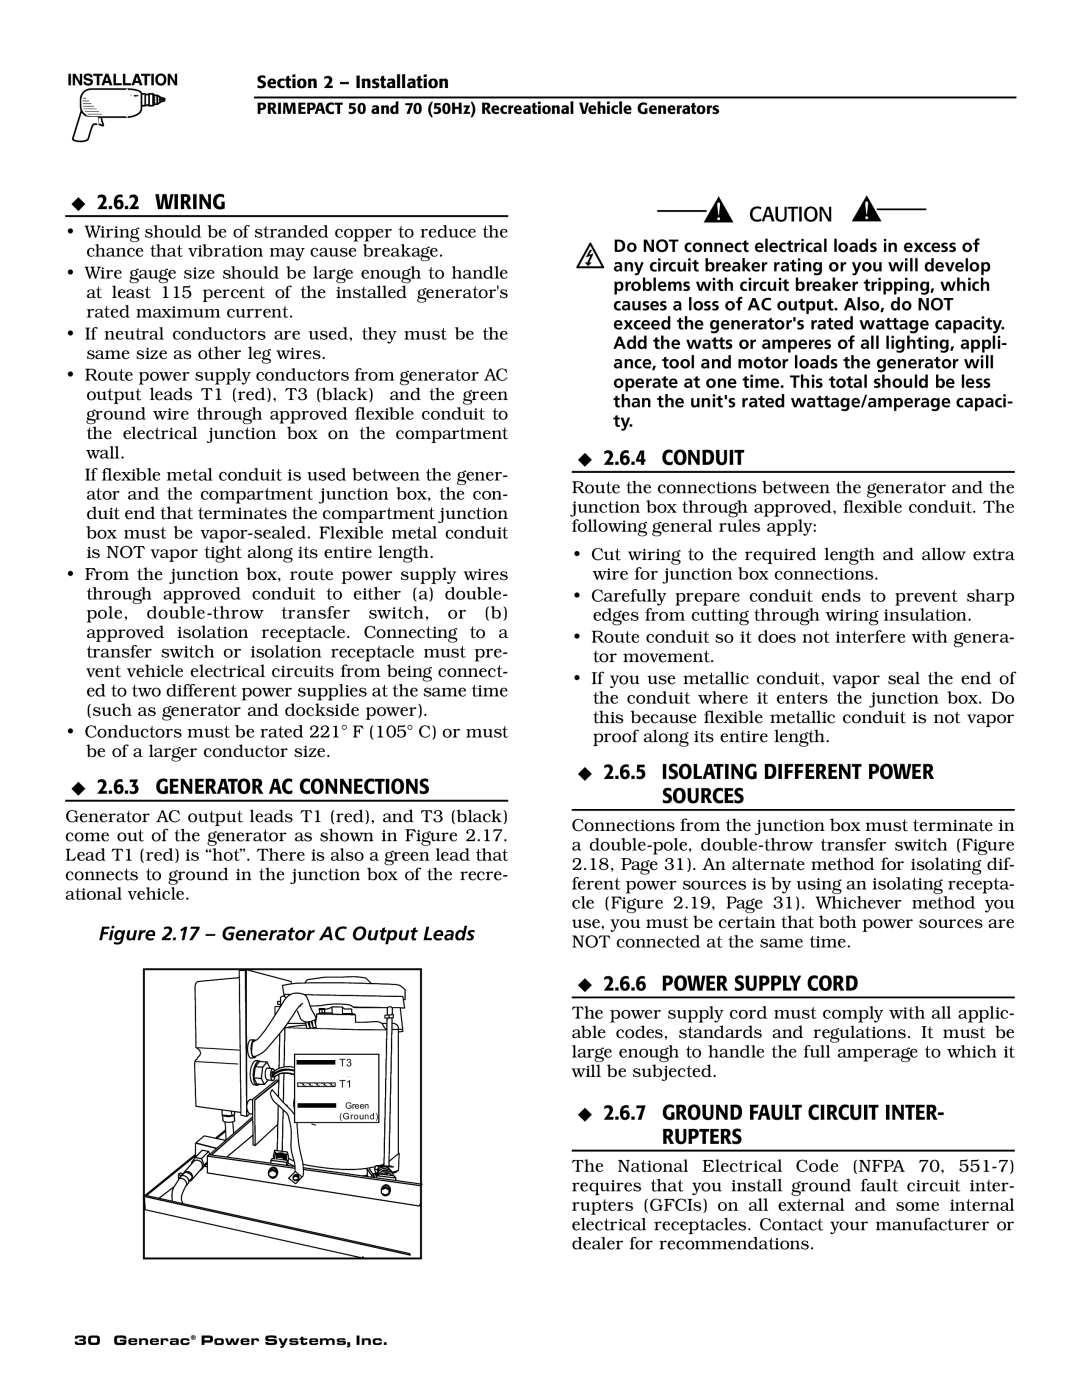 Generac 00784-2, 09290-4 Wiring, Generator Ac Connections, Conduit, Isolating Different Power Sources, Power Supply Cord 